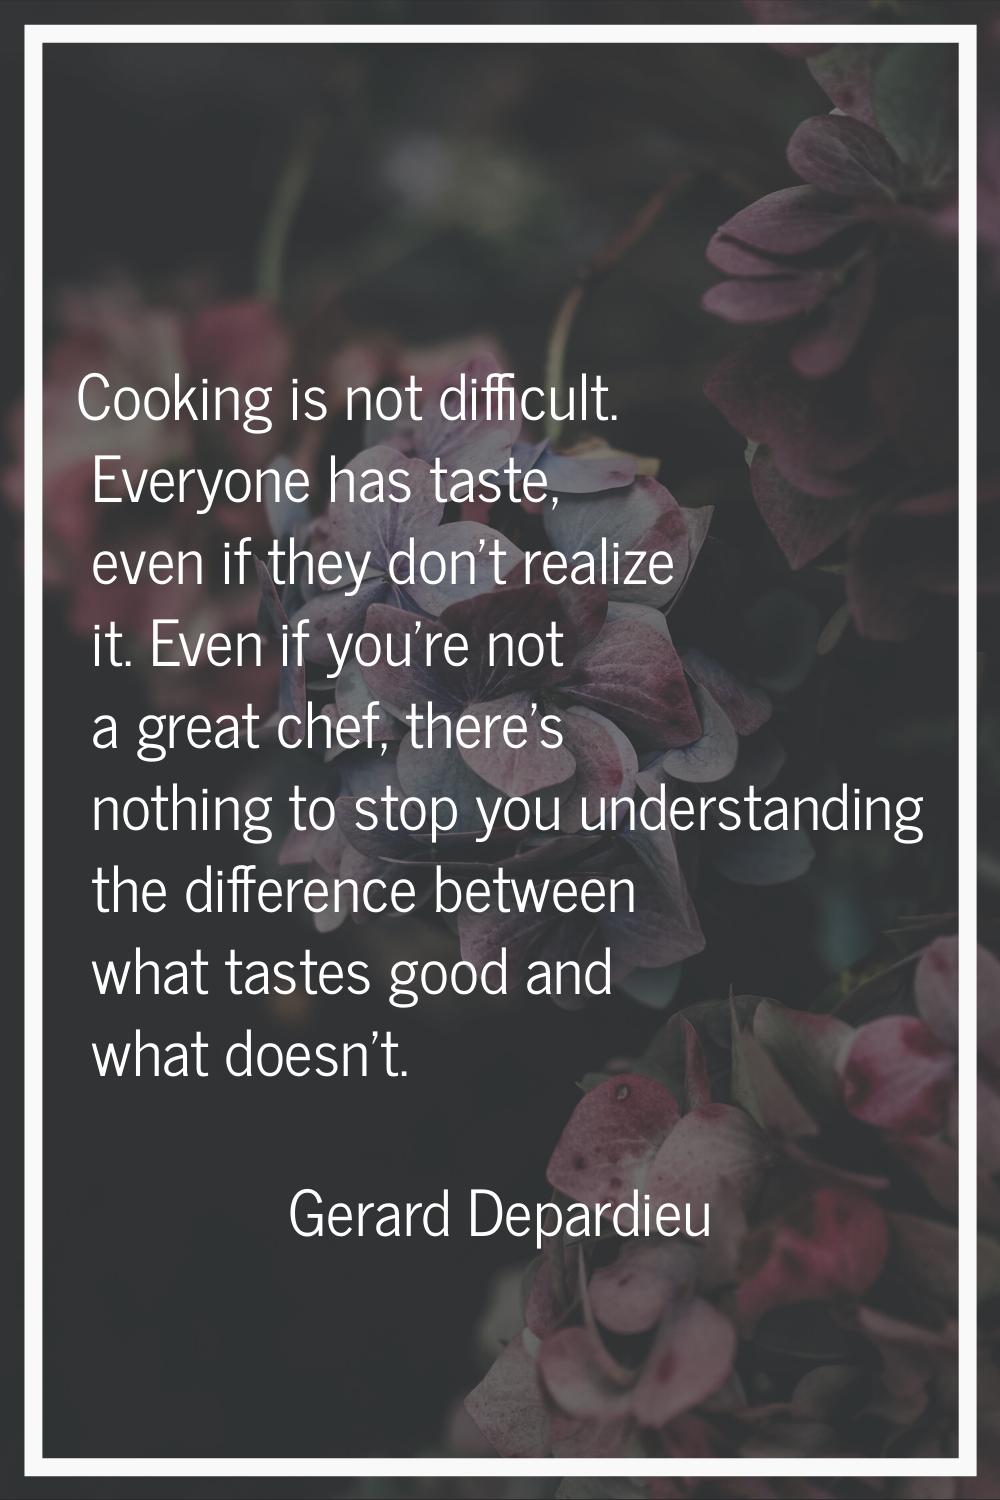 Cooking is not difficult. Everyone has taste, even if they don't realize it. Even if you're not a g